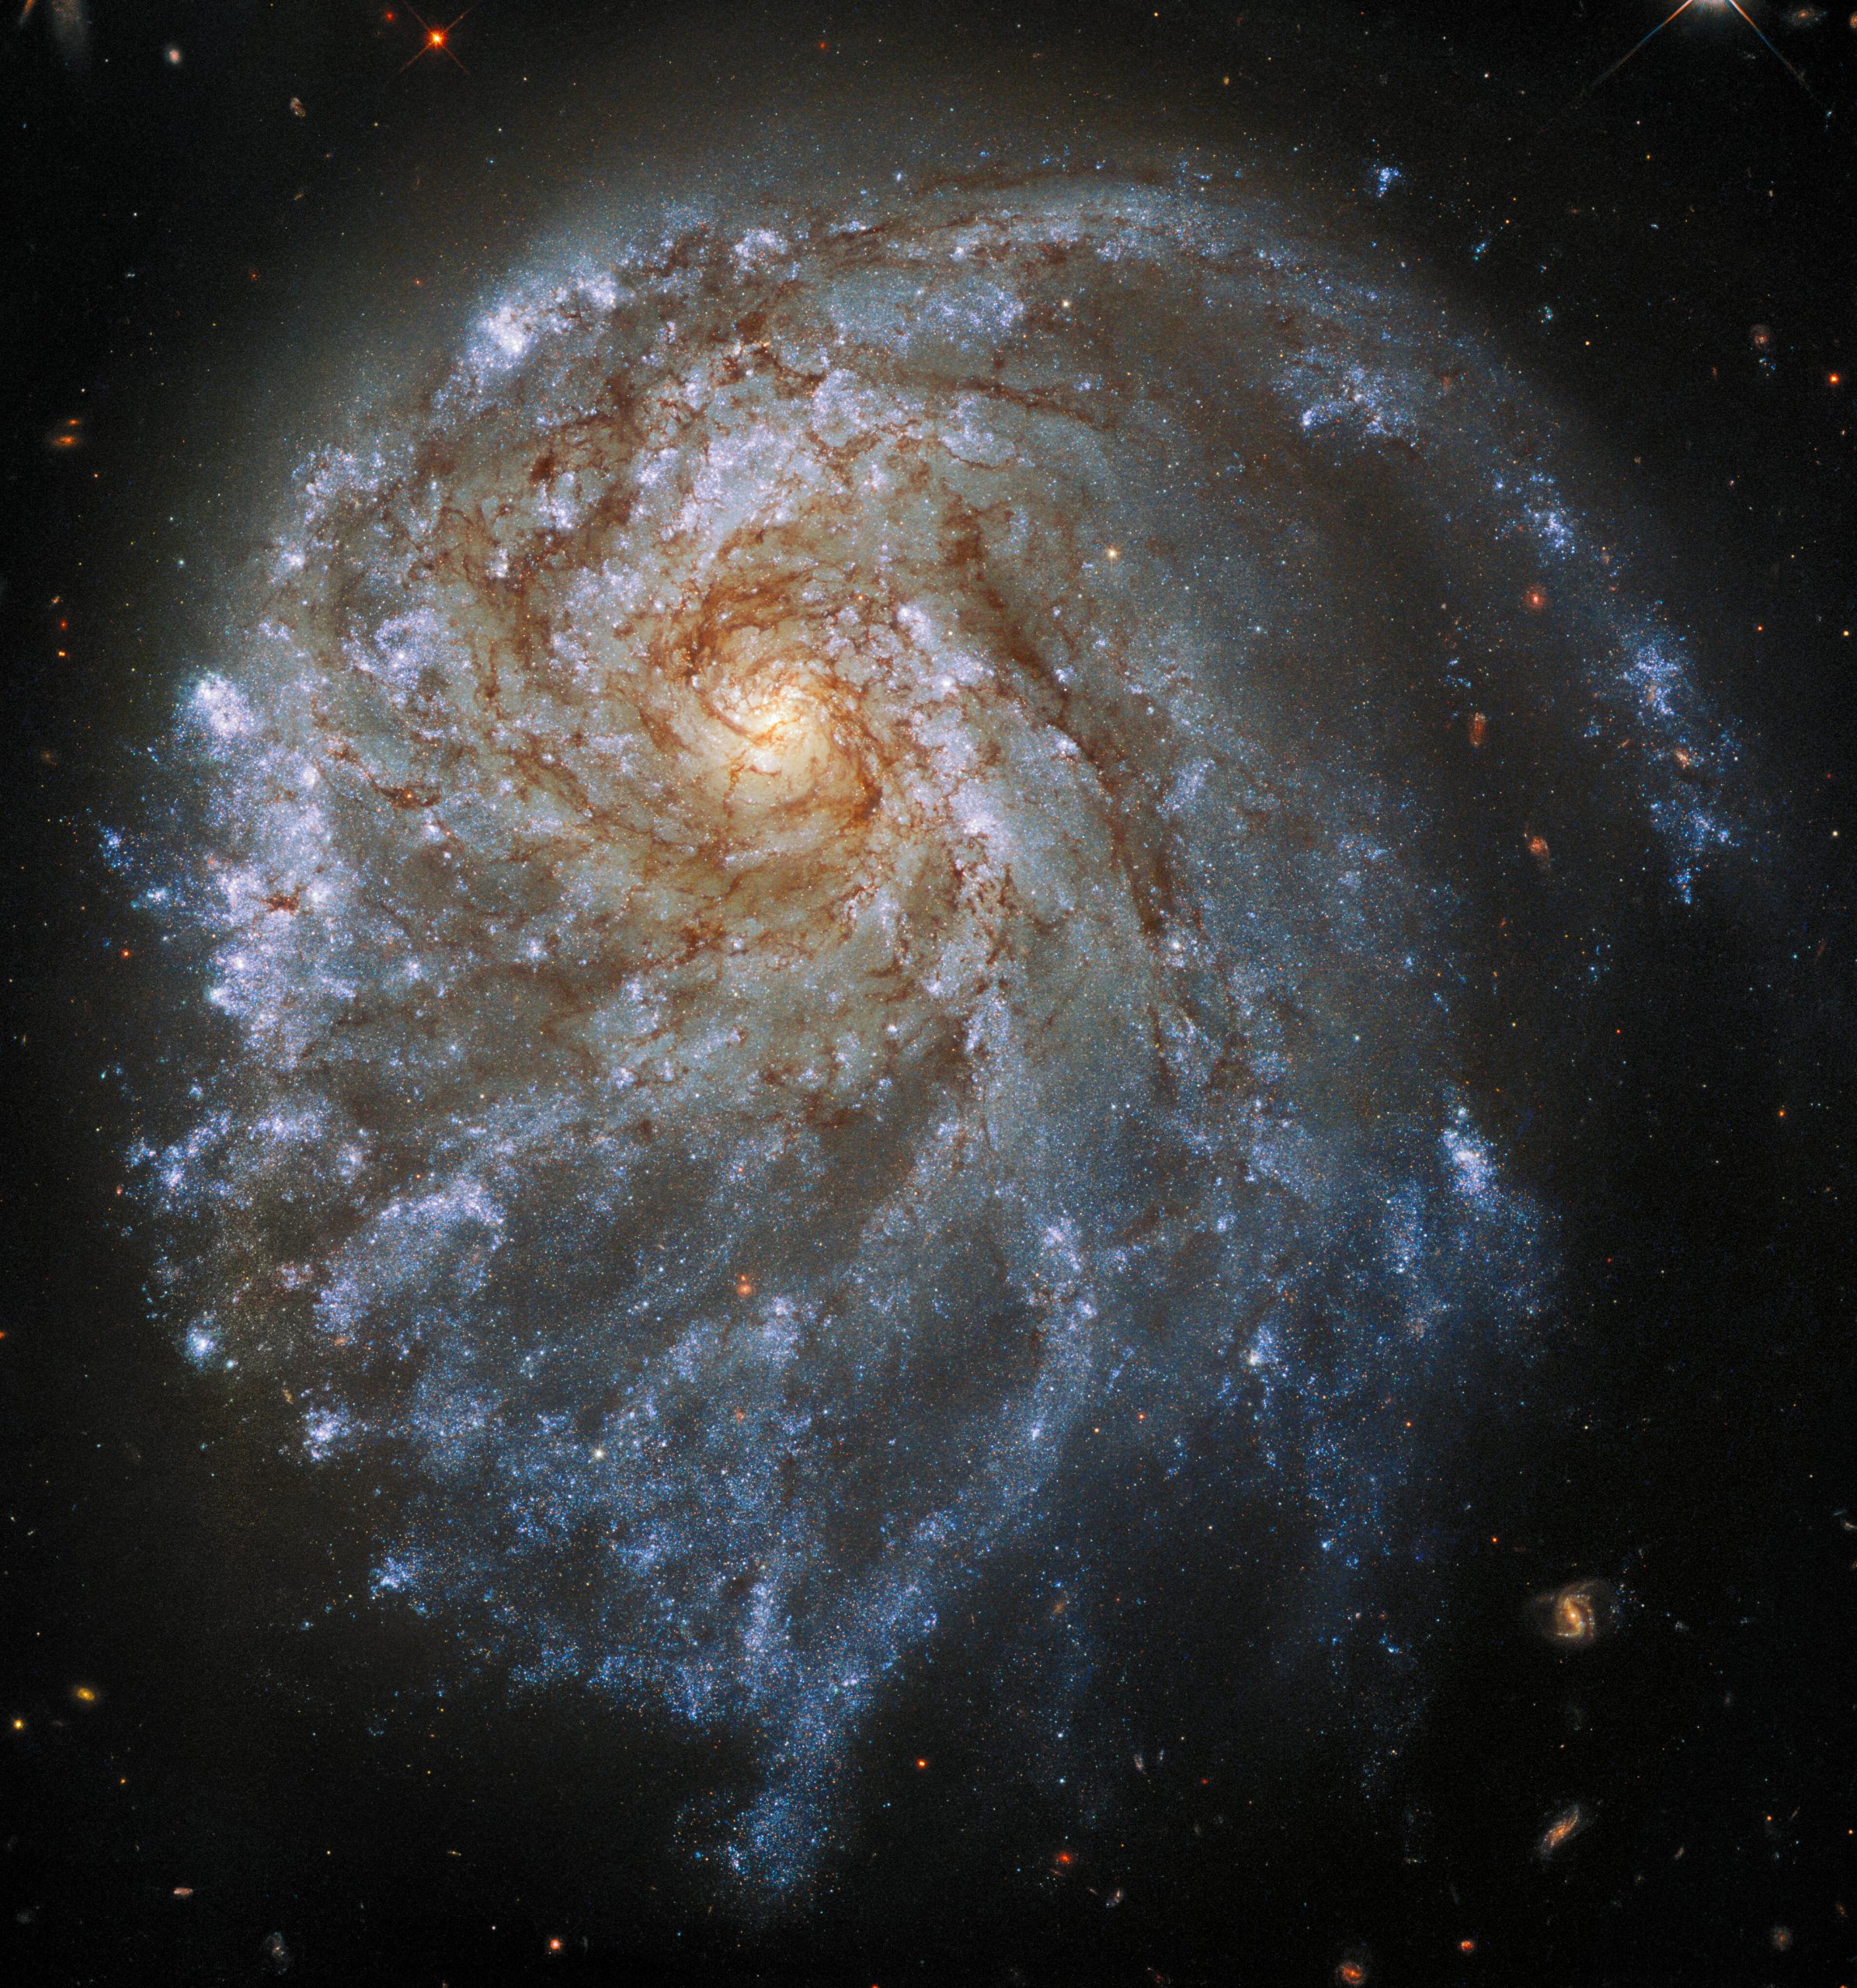 Spiral galaxy NGC 2276, located about 120 million light-years away, photographed here by Hubble and used for the month of July in the calendar. Credit: ESA/Hubble & NASA, P. Sell